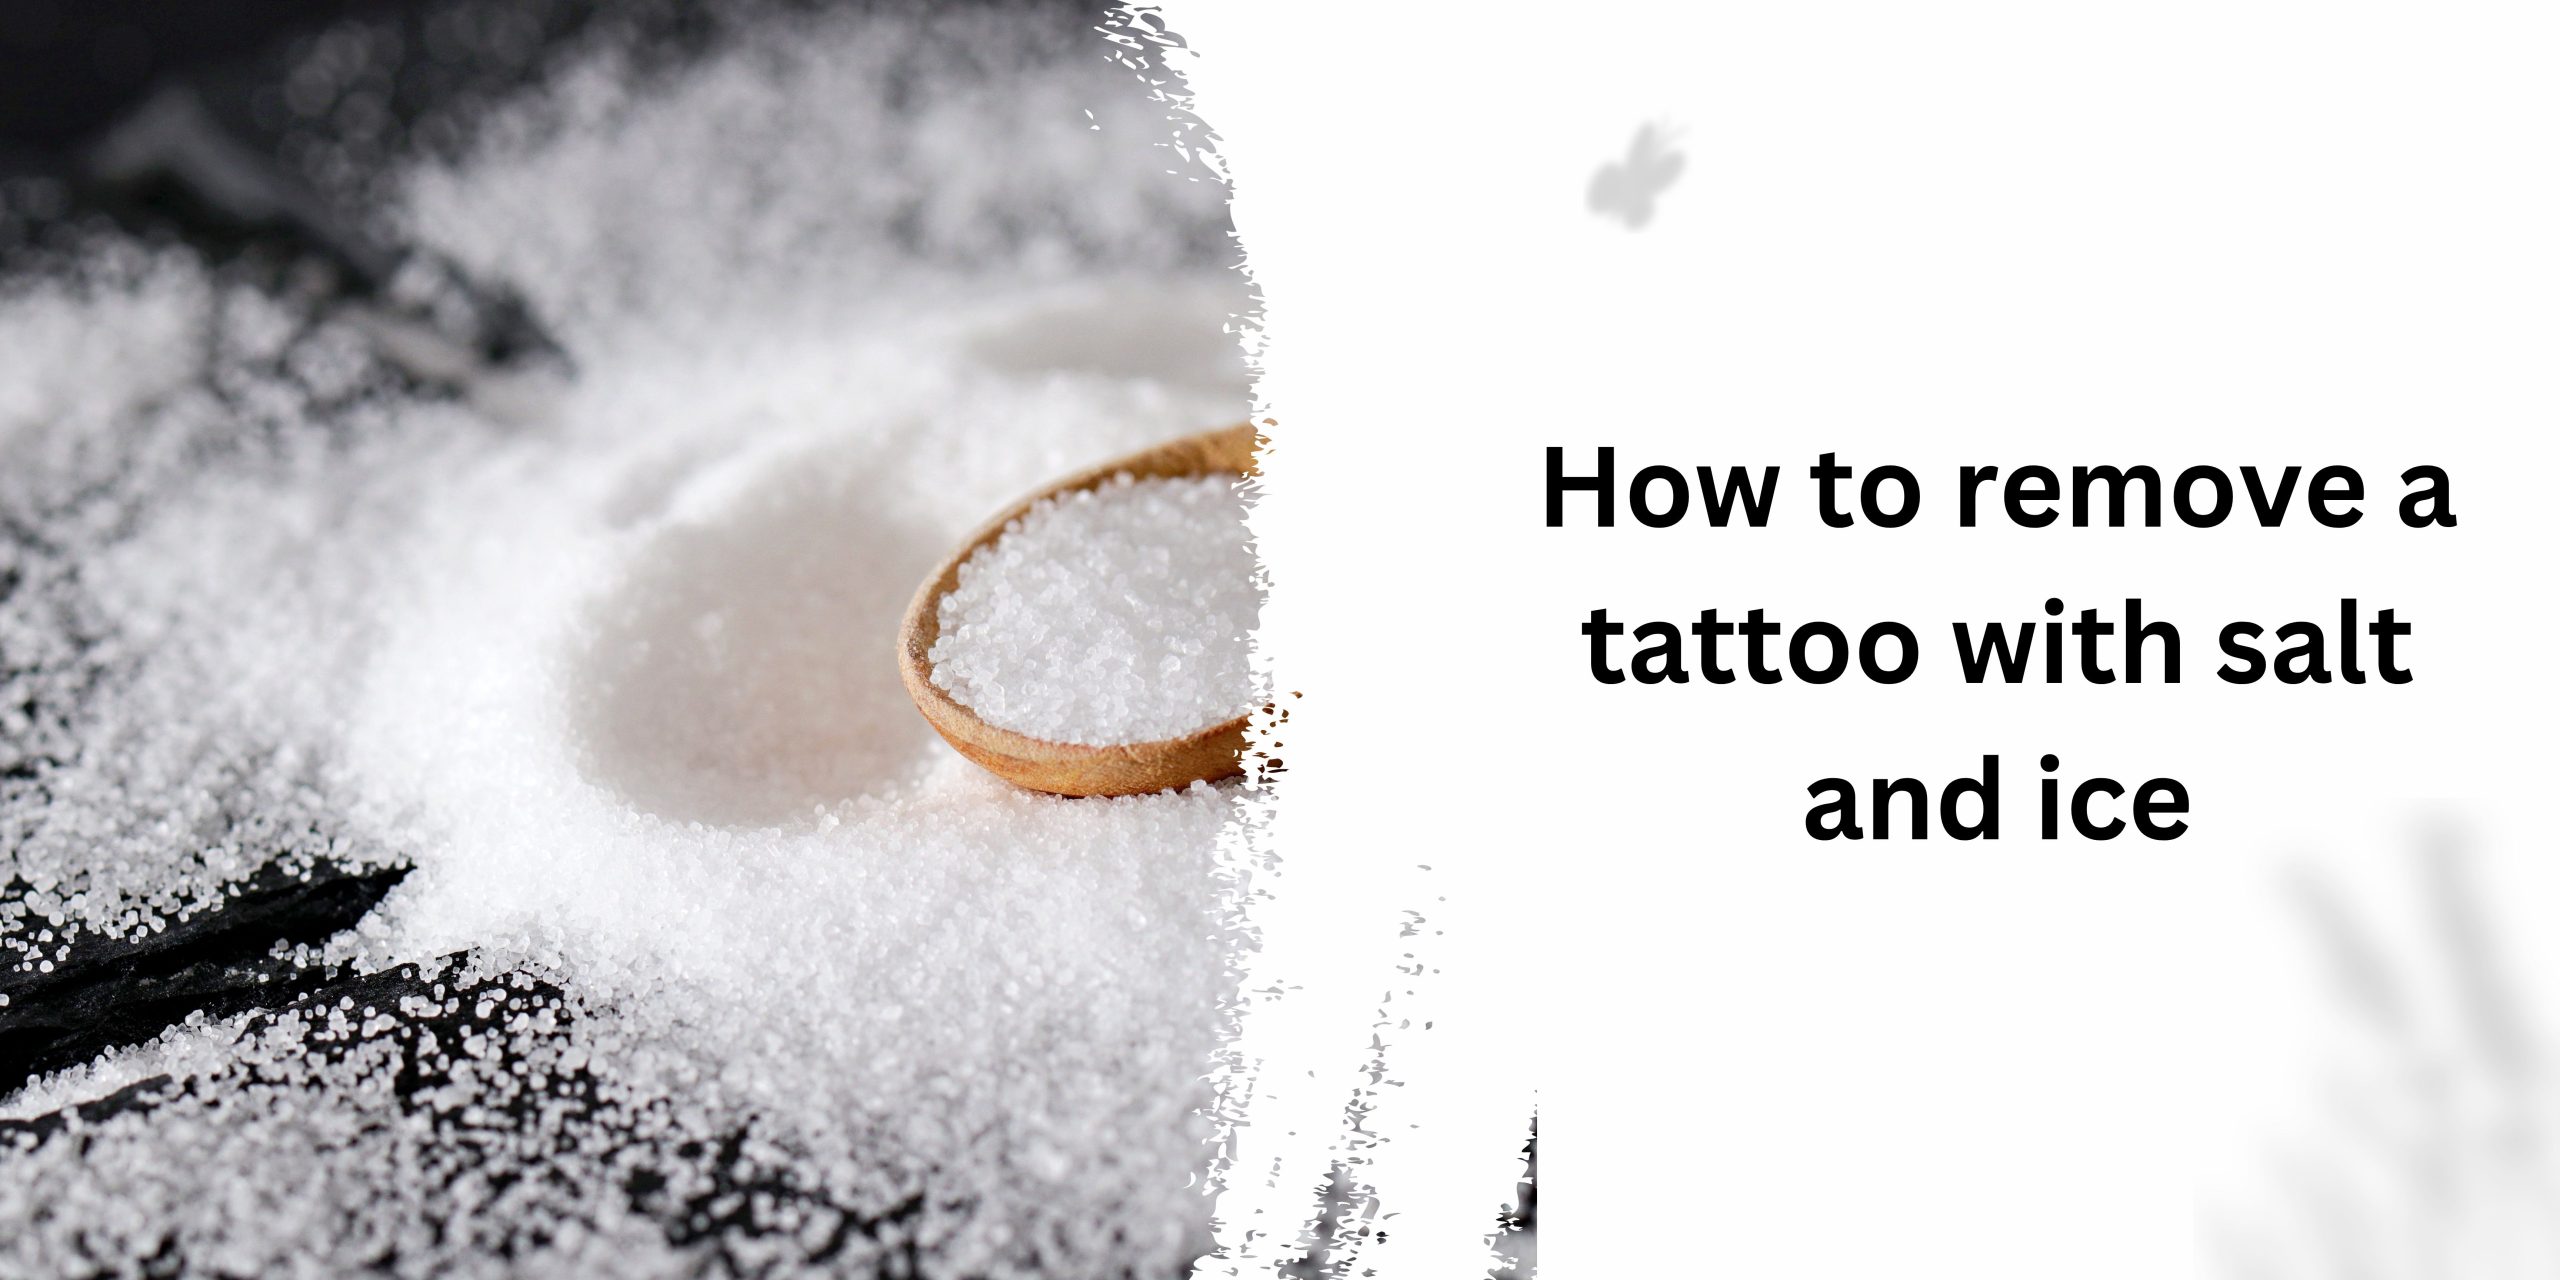 How to remove a tattoo with salt and ice